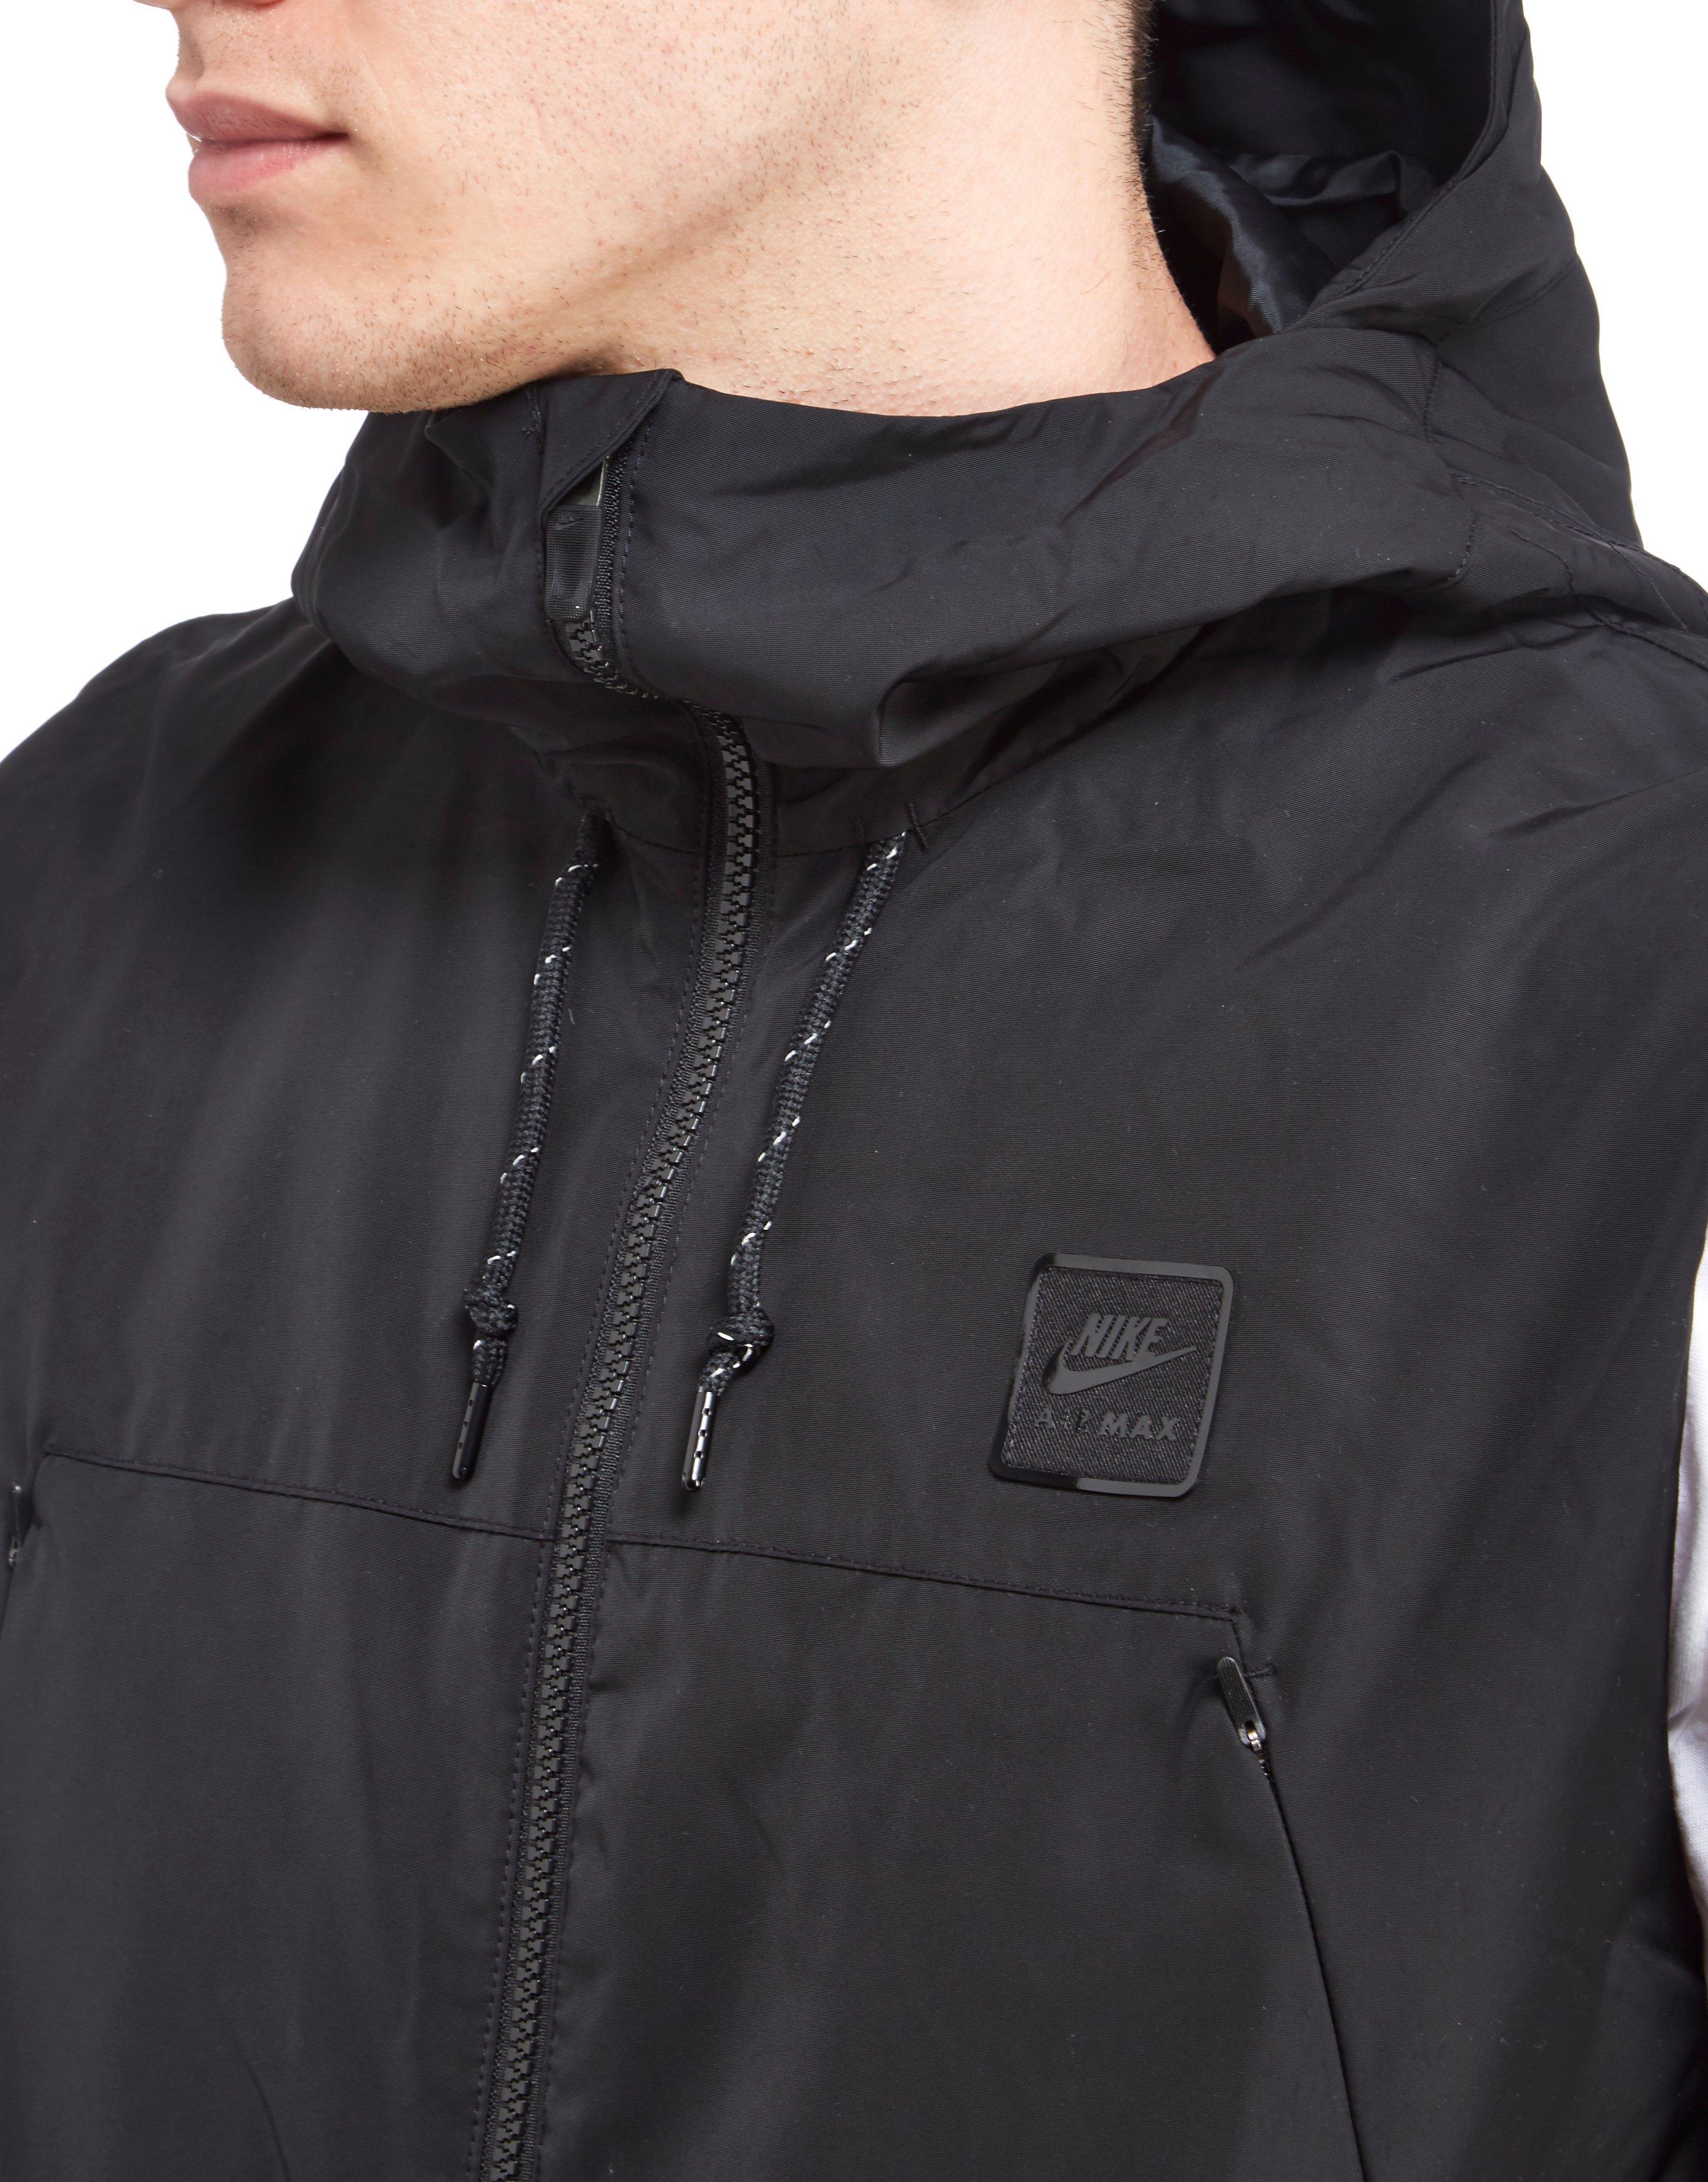 Nike Synthetic Air Max Light Gilet in Black for Men - Lyst